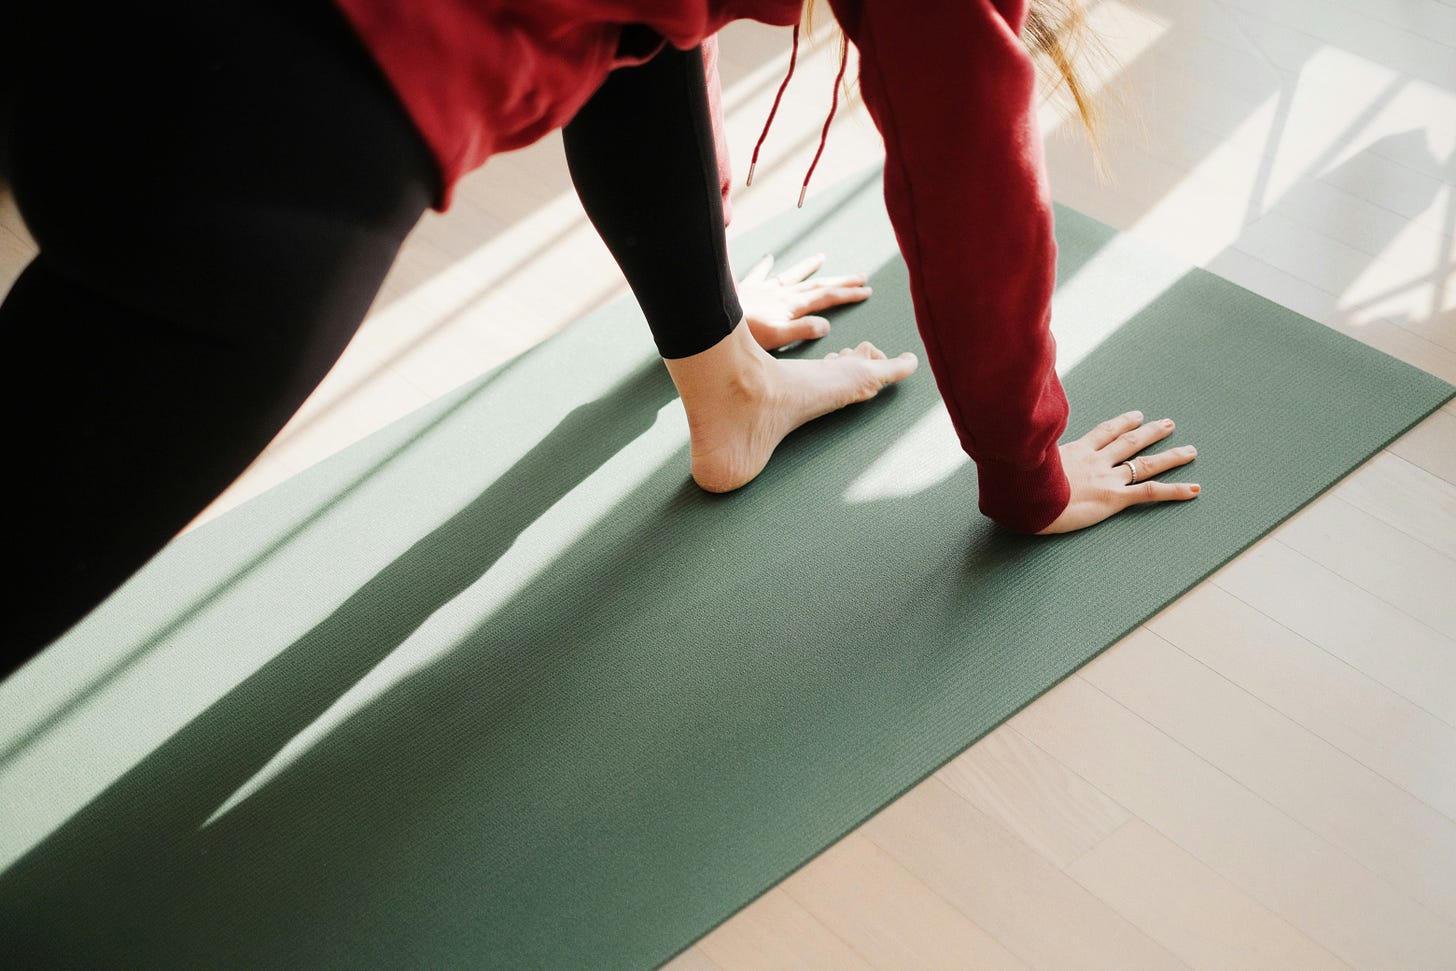 A person in red sweatshirt and black leggings in a forward lunge on a yoga mat, close-up view so only hands and front foot and part of trunk are visible